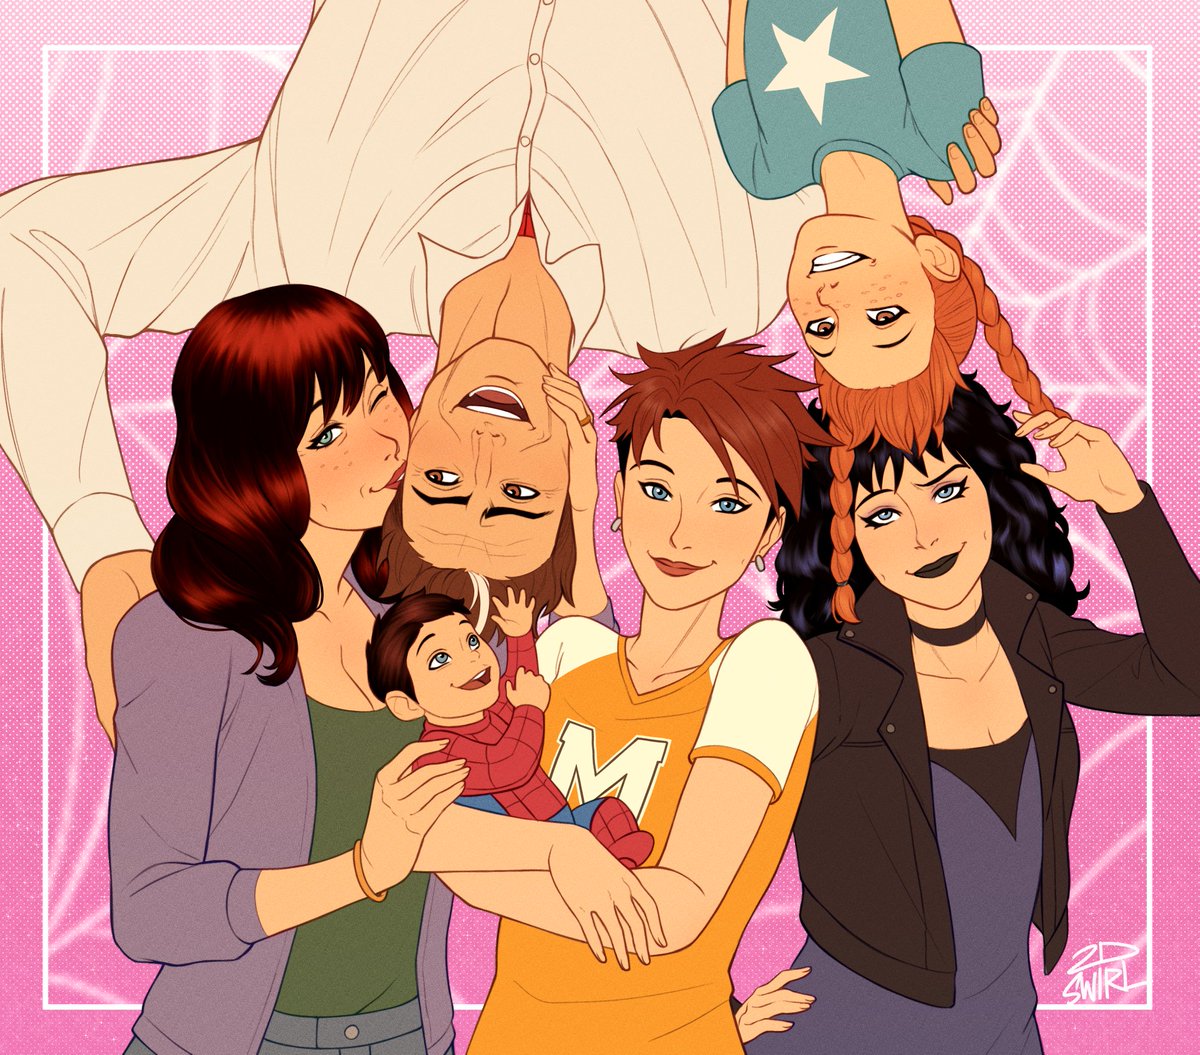 The Parker Family!!!

#SpiderMan #PeterParker #MaryJaneWatson #MaryJaneWatsonParker #MayMaydayParker #MayParker #MaydayParker #AprilParker #AnnieMayParker #BenParker #RemarryPeterMJ #RemarryPeterMJParker #RemarryPeterMaryJaneParker